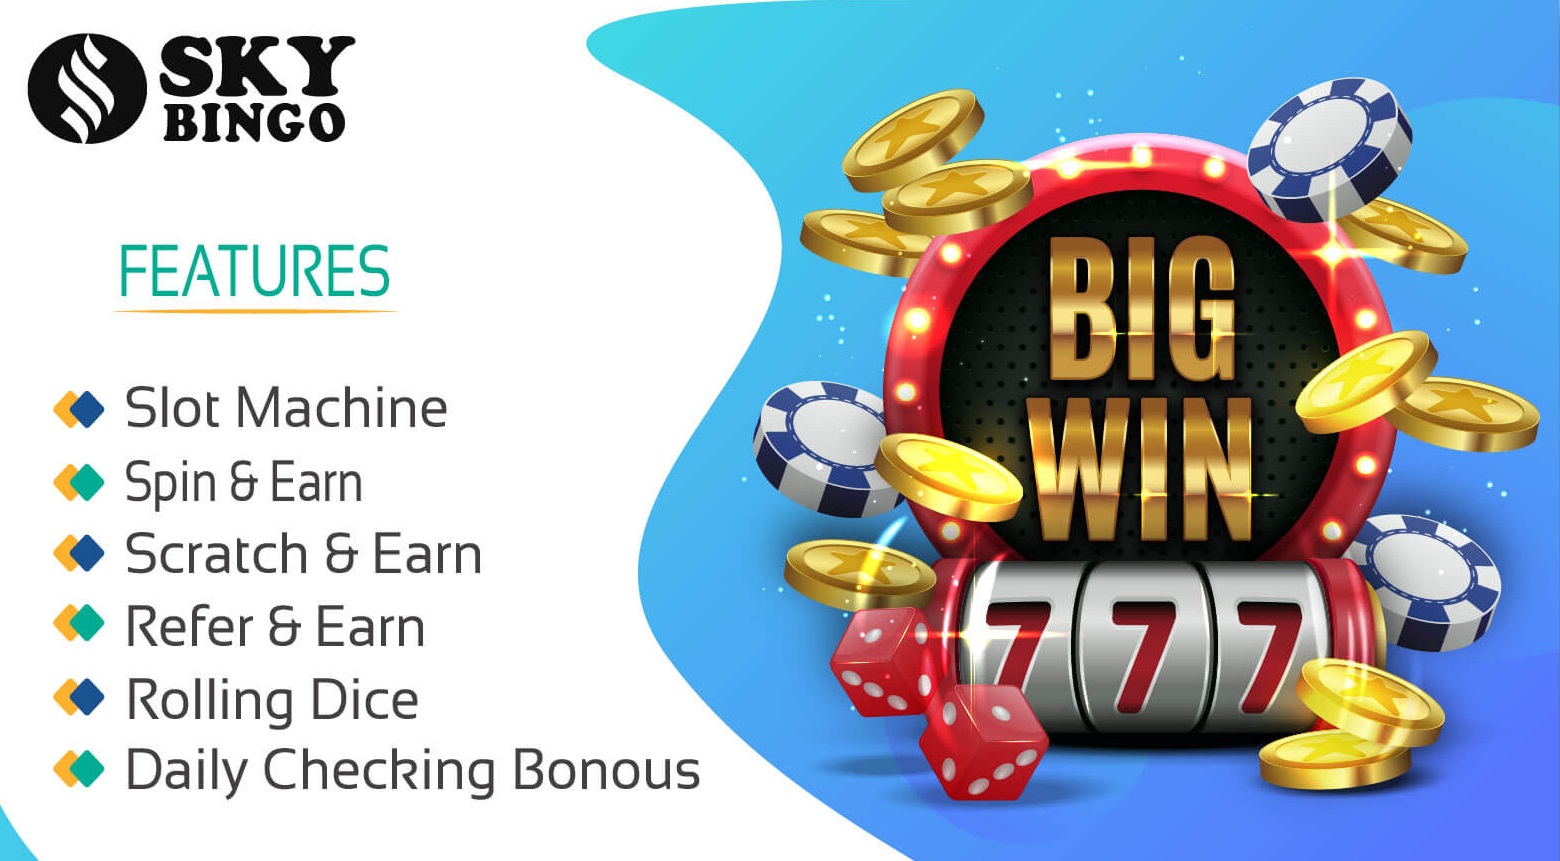 admob app, best earning app, check daily to get bonus, earning game, lottery app, Make Money App, play and earn app, reward app, roll dice and earn money, scratch card and win big, skybingo lottery game, slot machine for get real money, spin wheel and try your luck, tik tok app like trending, unity game